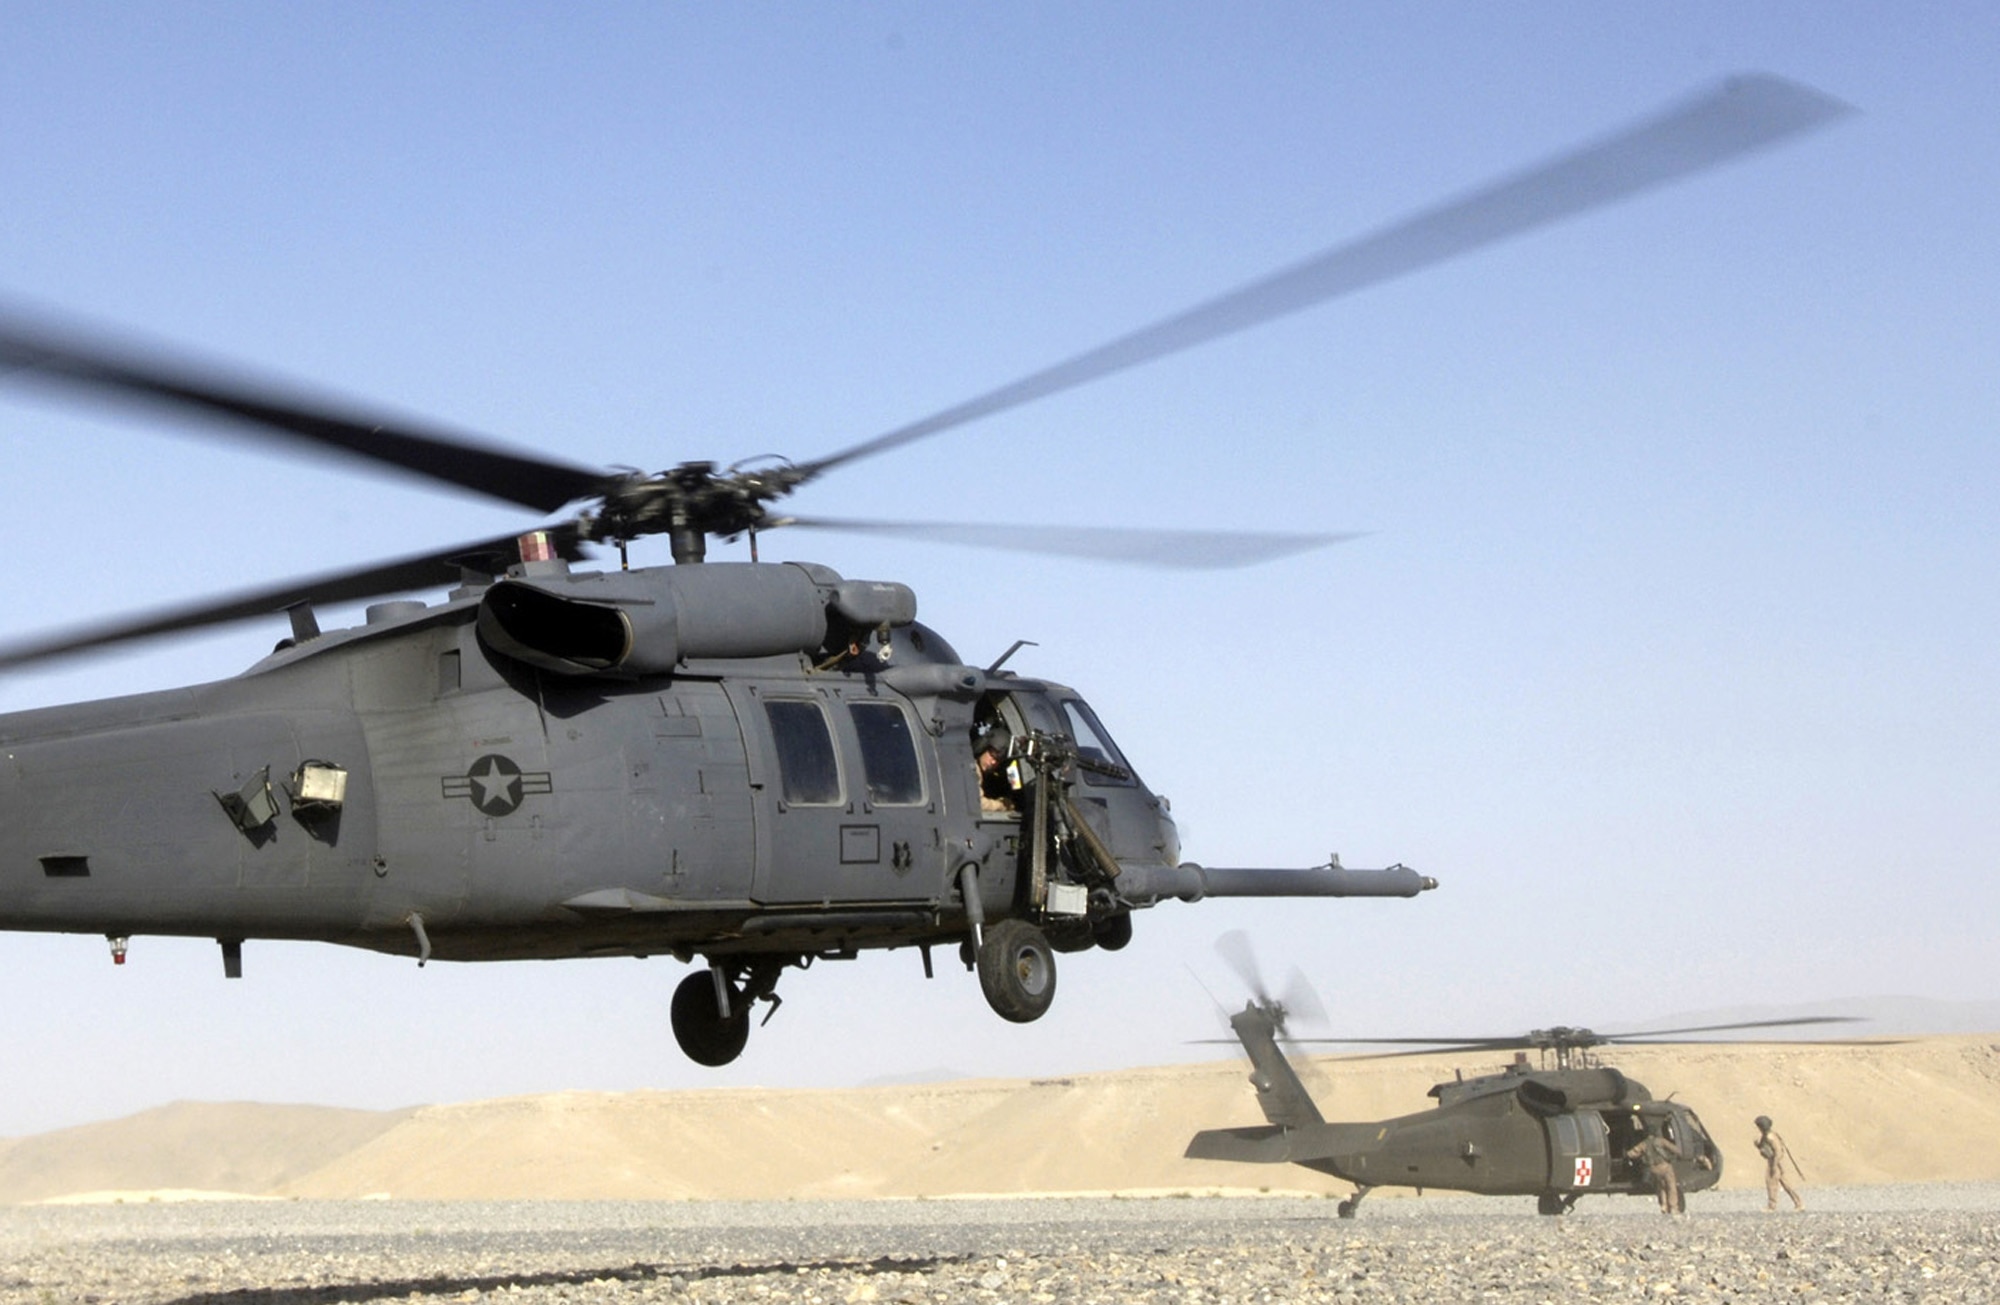 An HH-60G Pave Hawk helicopter lands as an Army UH-60 Black Hawk prepares to pick up a medivac patient.  The HH-60G is a twin-engine medium-lift helicopter used in combat search and rescue missions. (U.S. Air Force photo)